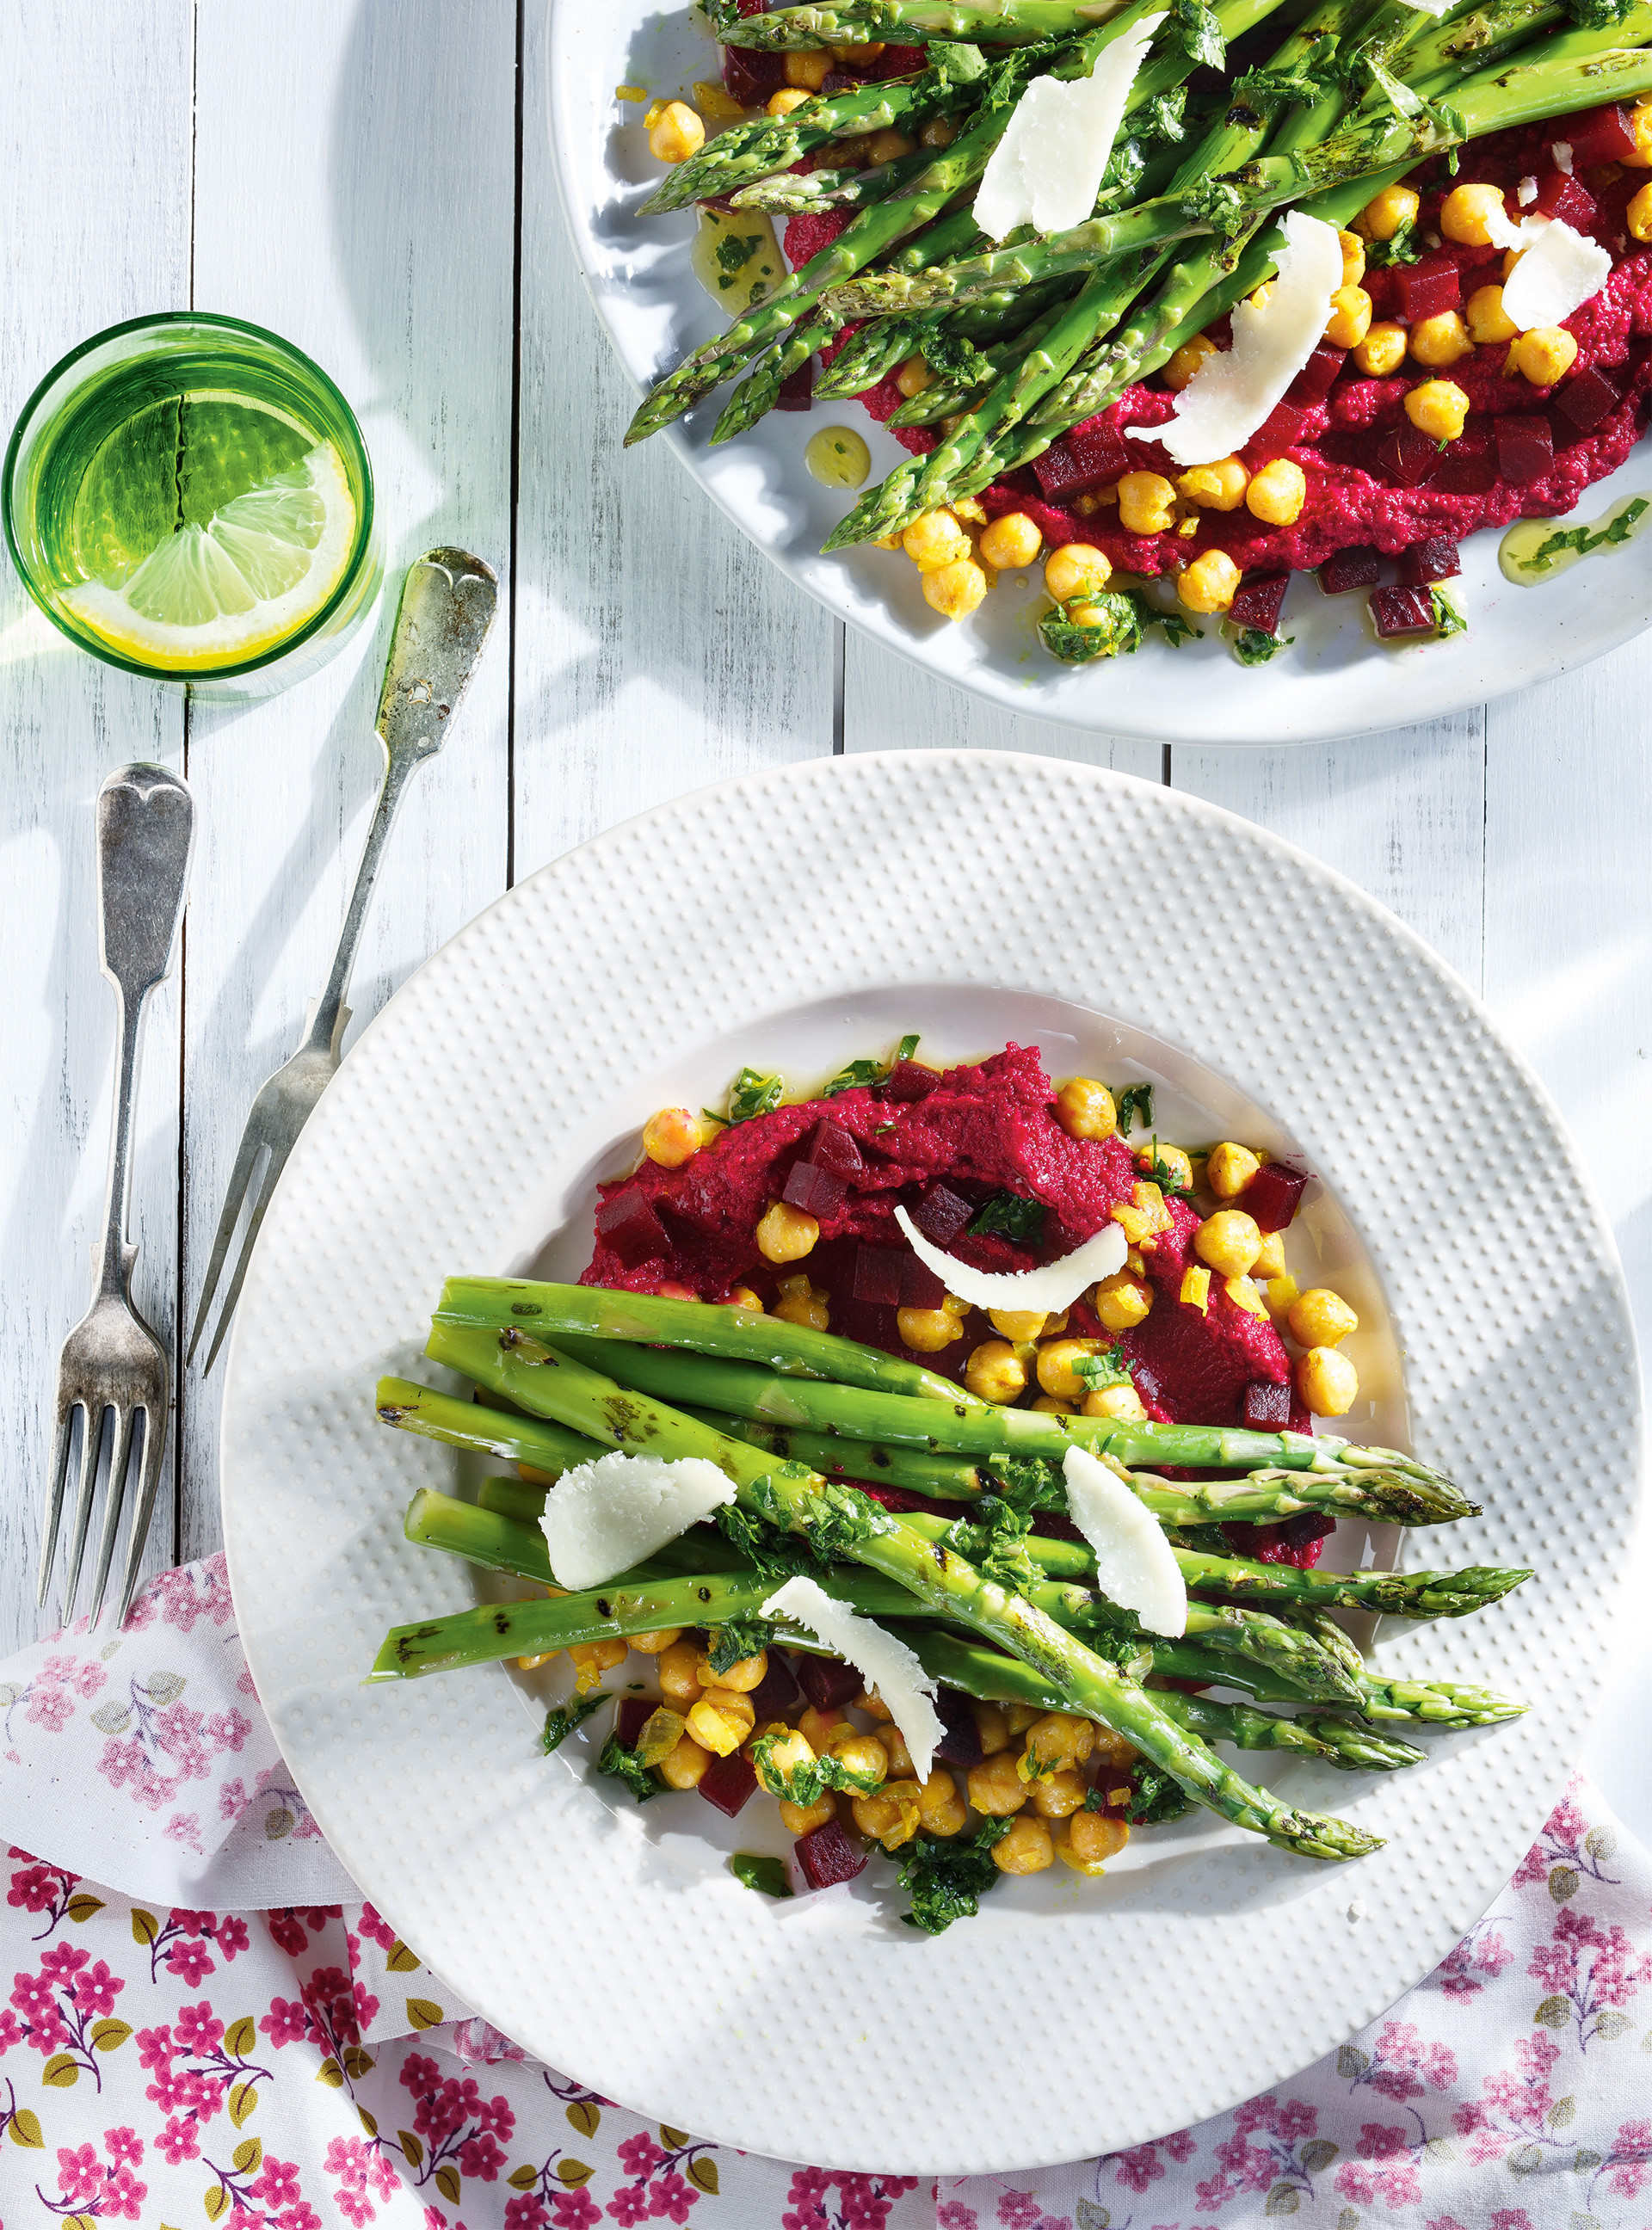 Grilled Asparagus with Beet Hummus and Curried Chickpeas